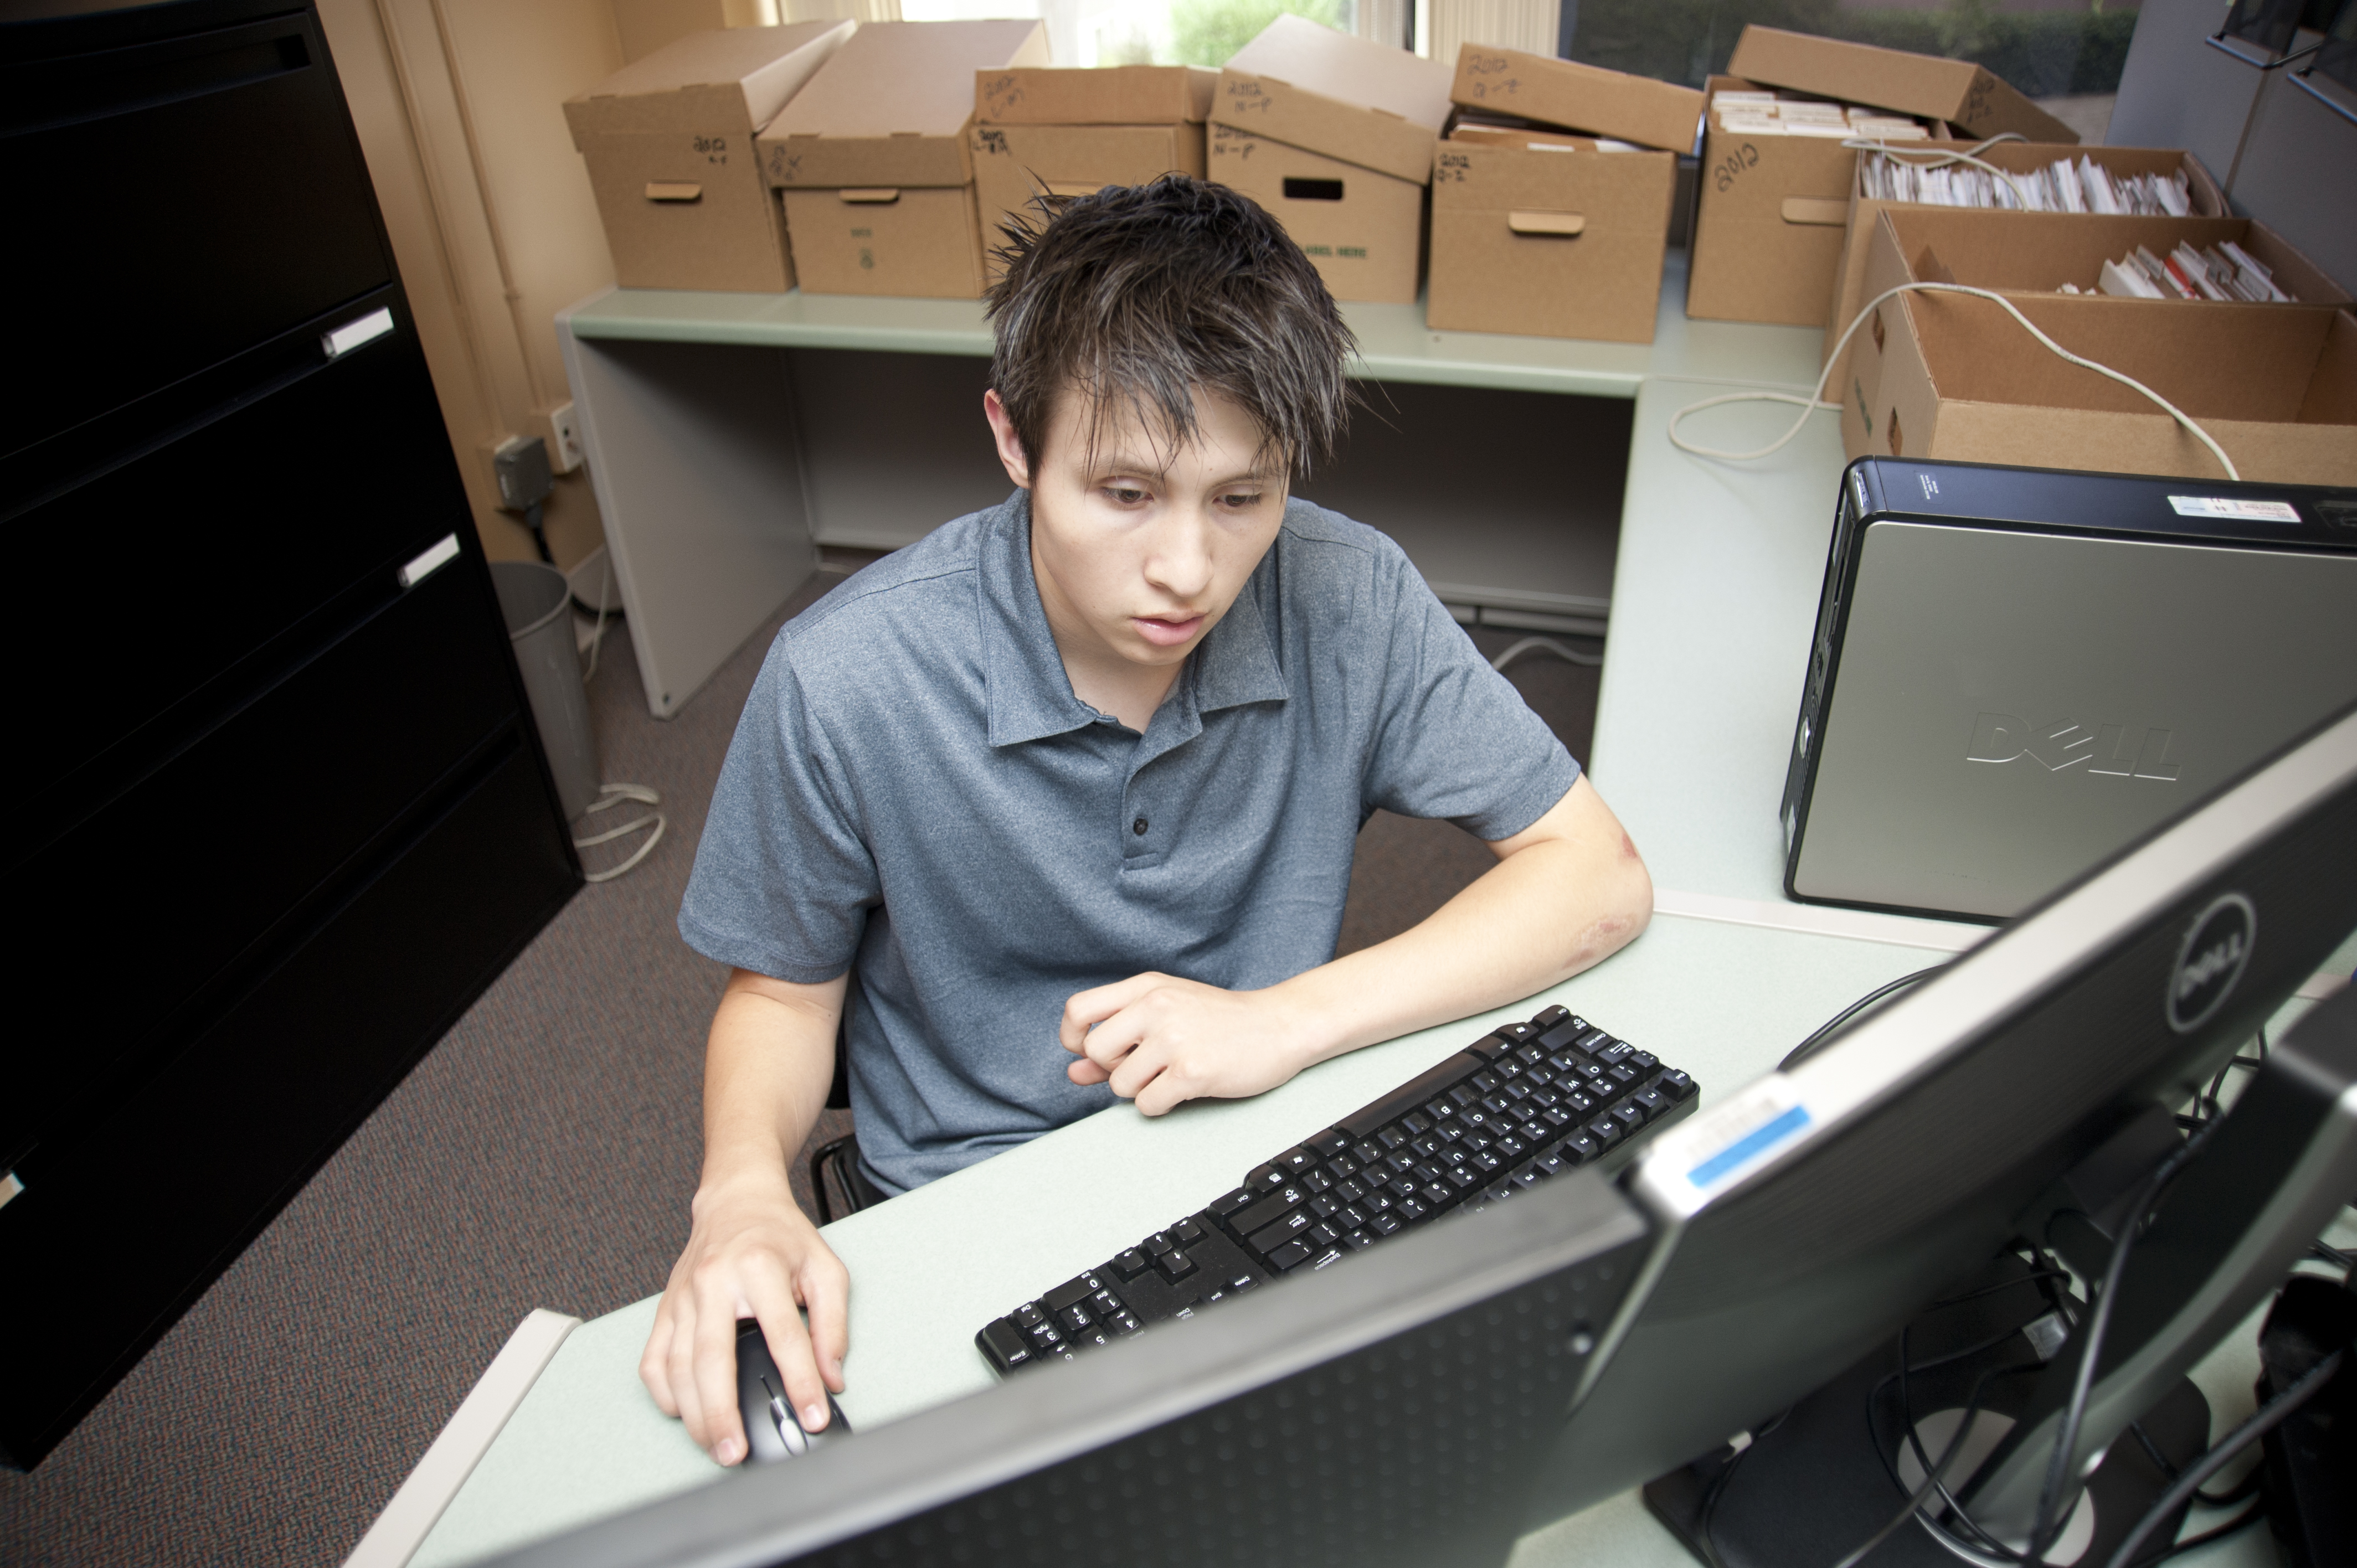 A young man working on a computer in a small office.